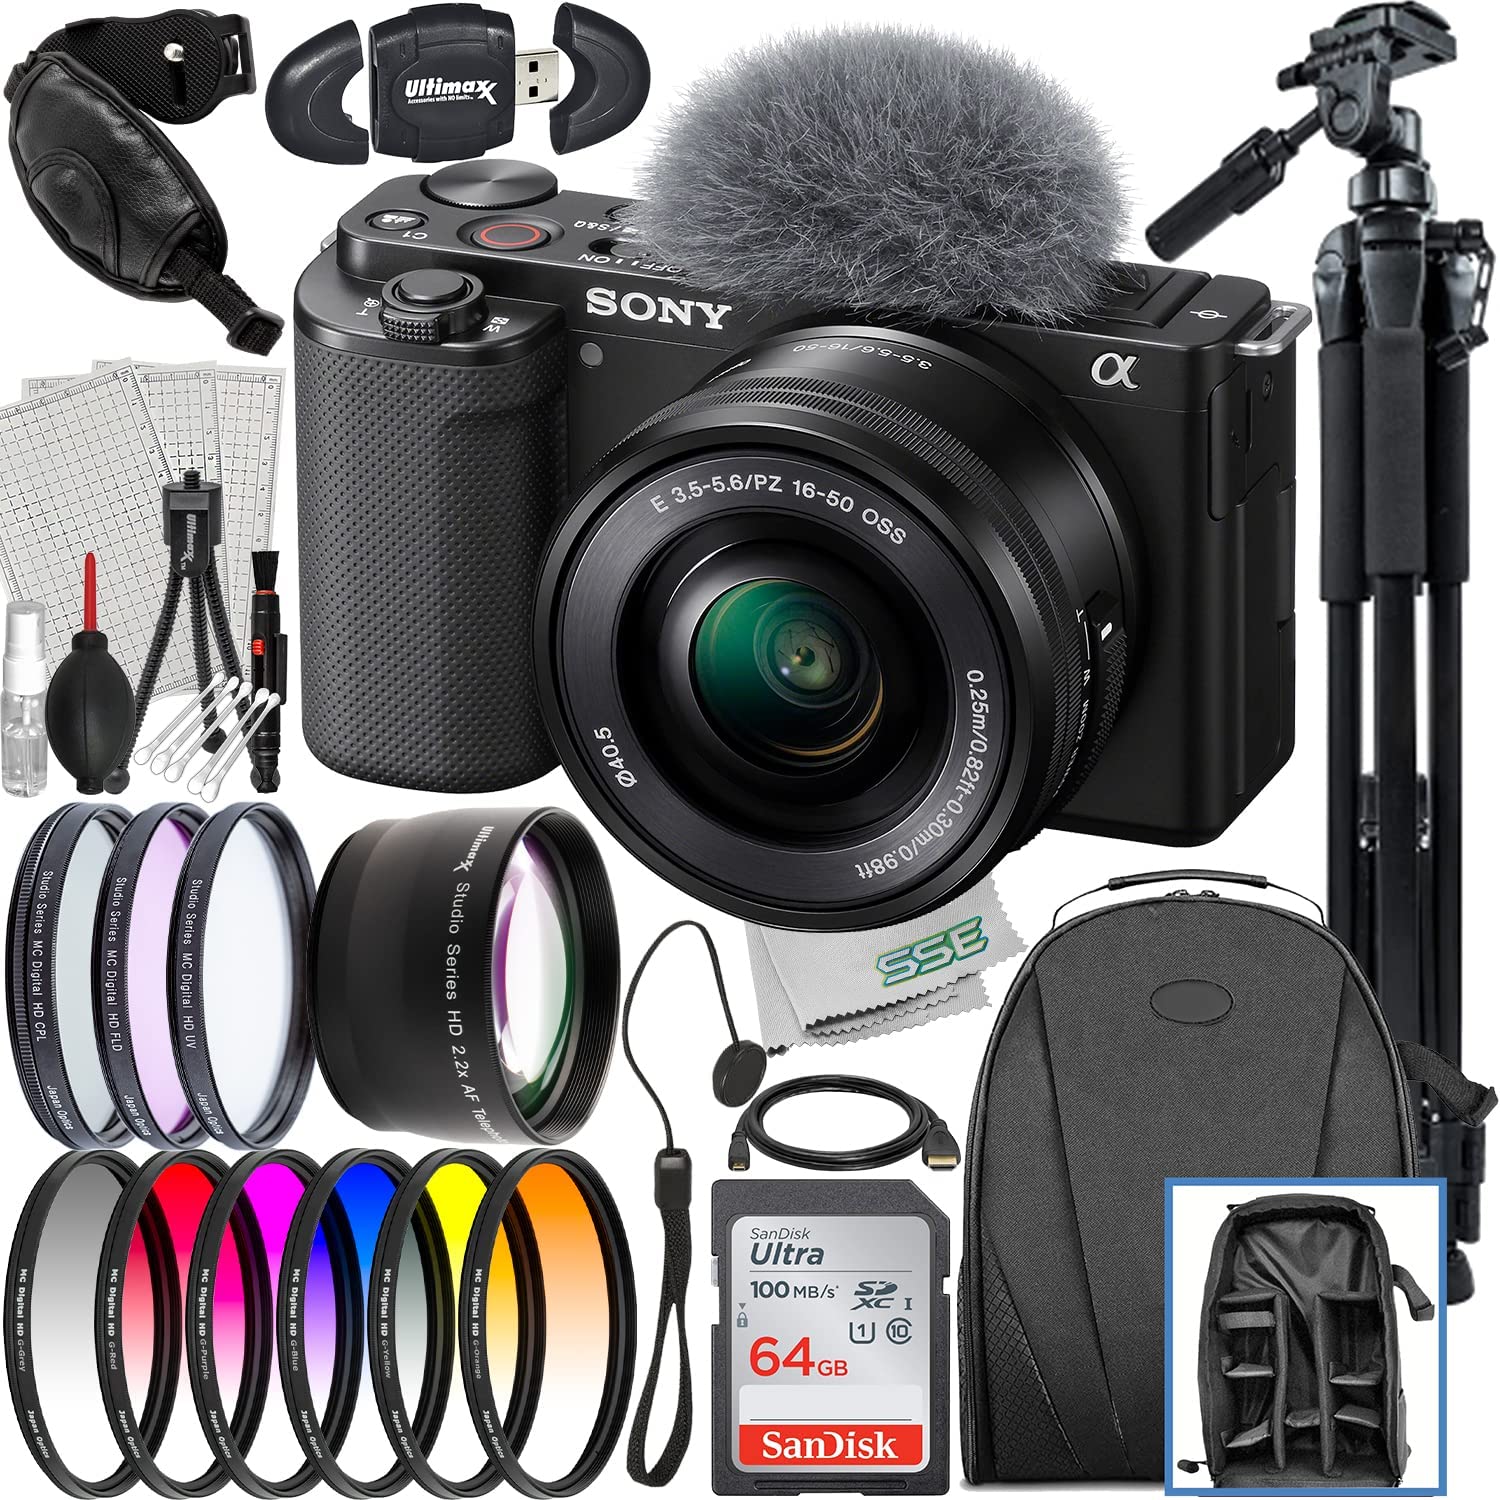 Sony ZV-E10 Mirrorless Camera with 16-50mm Lens (Black) + Advanced Accessory Bundle: SanDisk 64GB Ultra SDXC, 6PC Gradual Color Filter Kit, 60” Tripod & Much More (33pc Bundle)